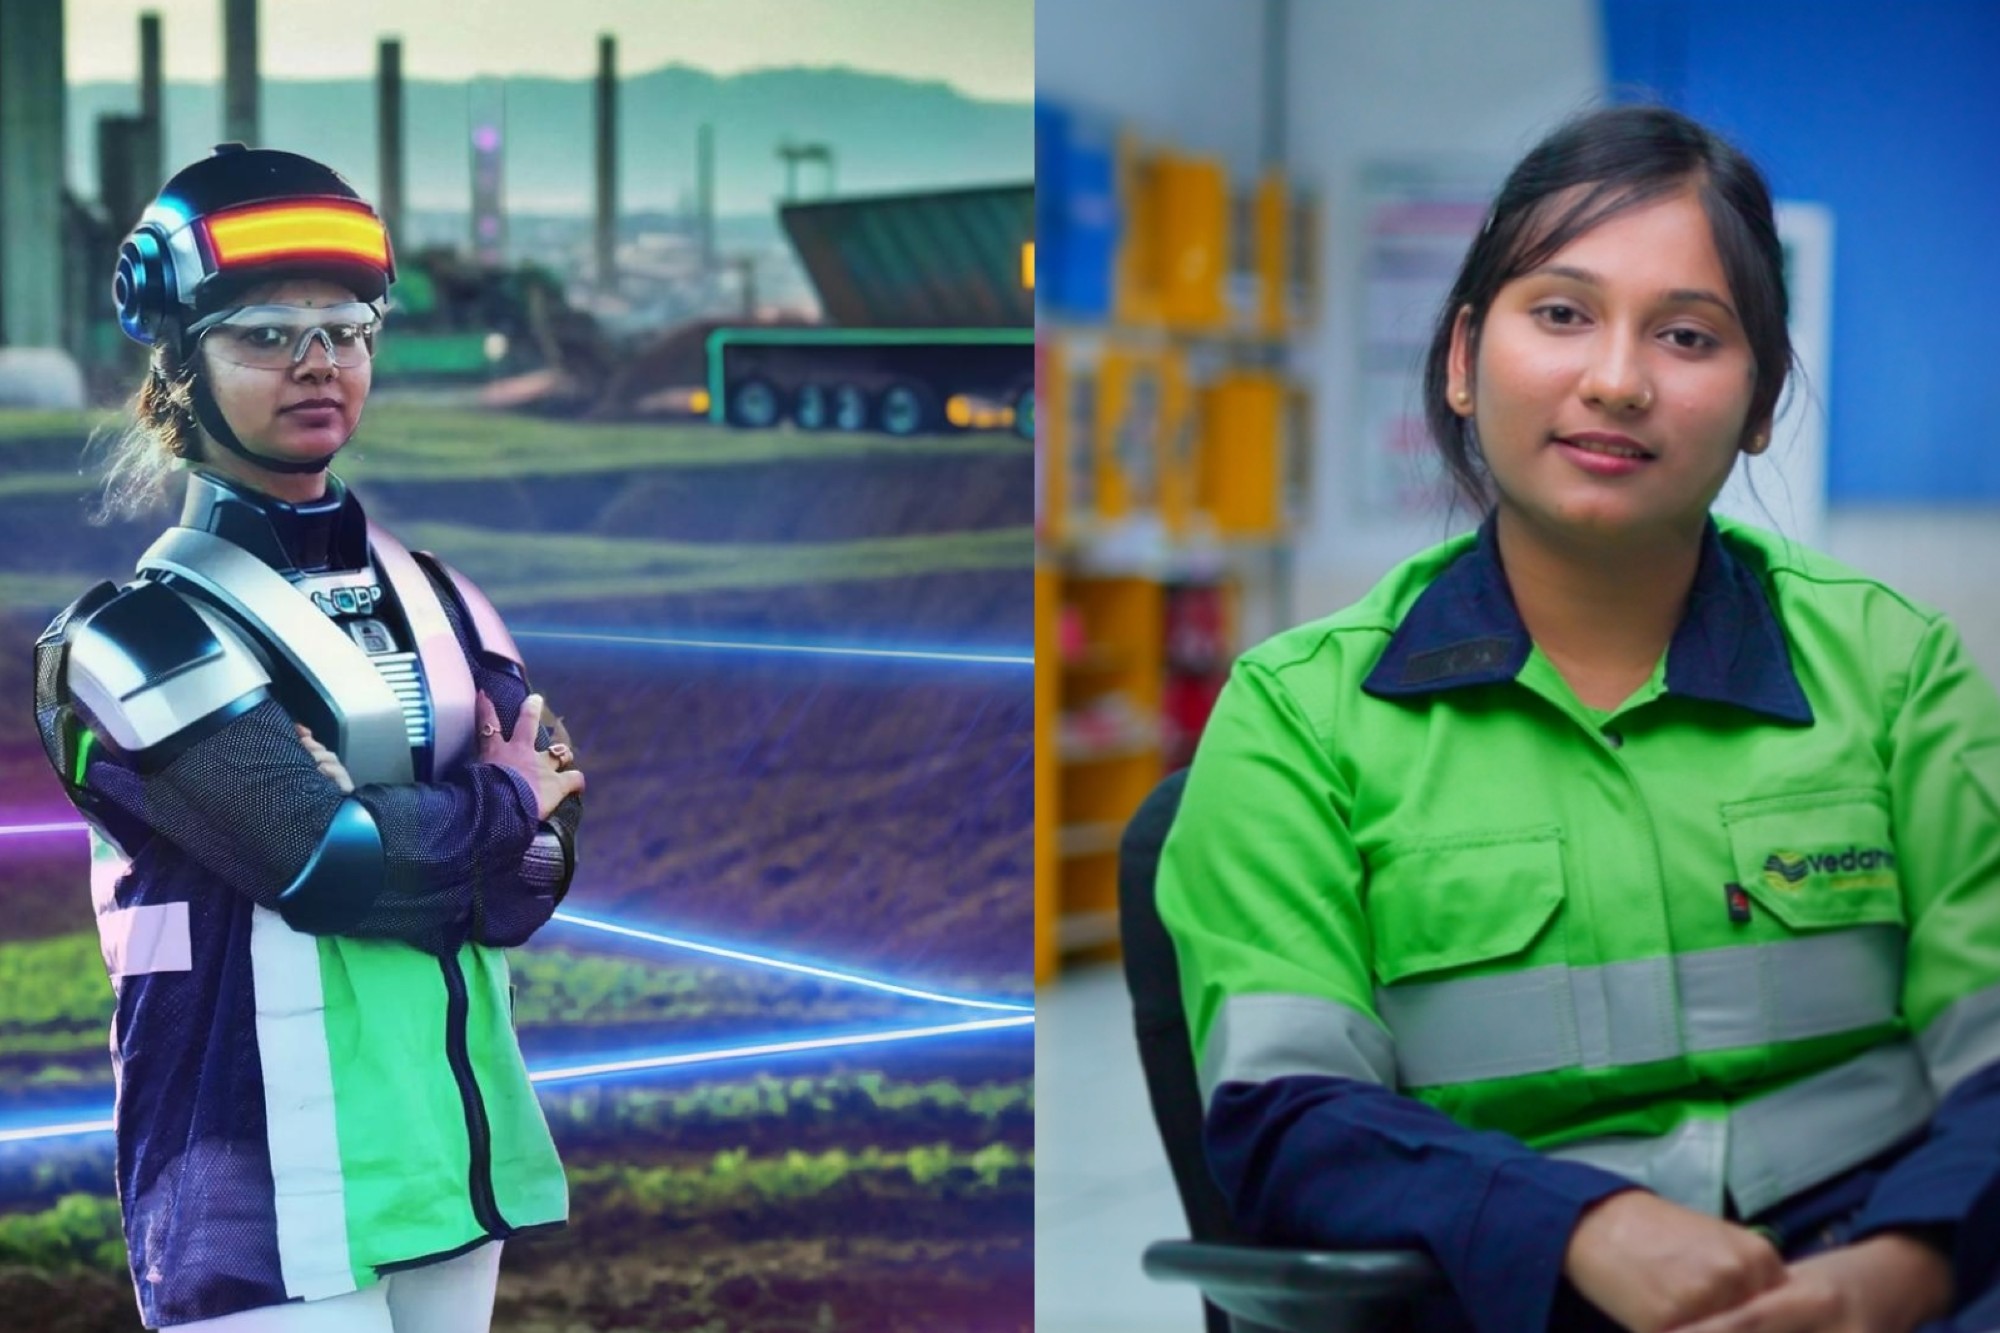 Vedanta’s campaign to promote women in metal and mining industry